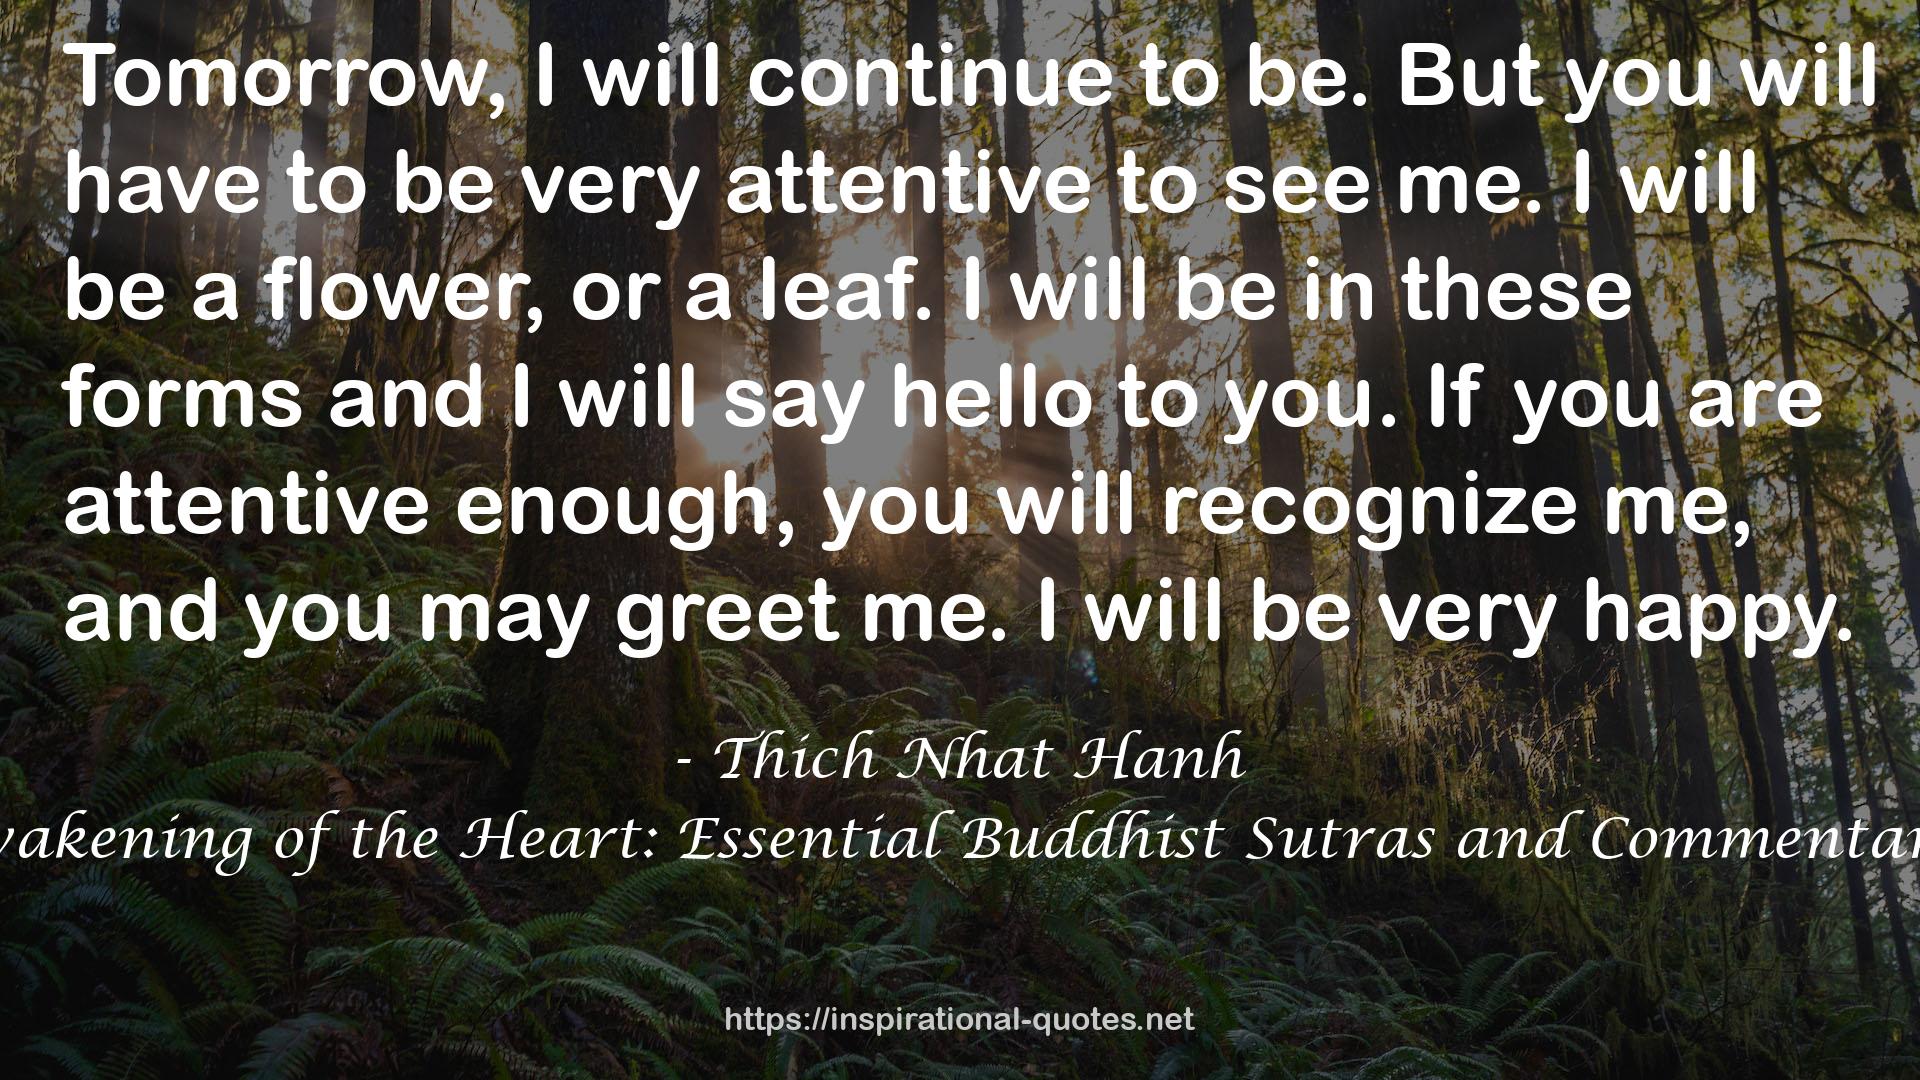 Awakening of the Heart: Essential Buddhist Sutras and Commentaries QUOTES